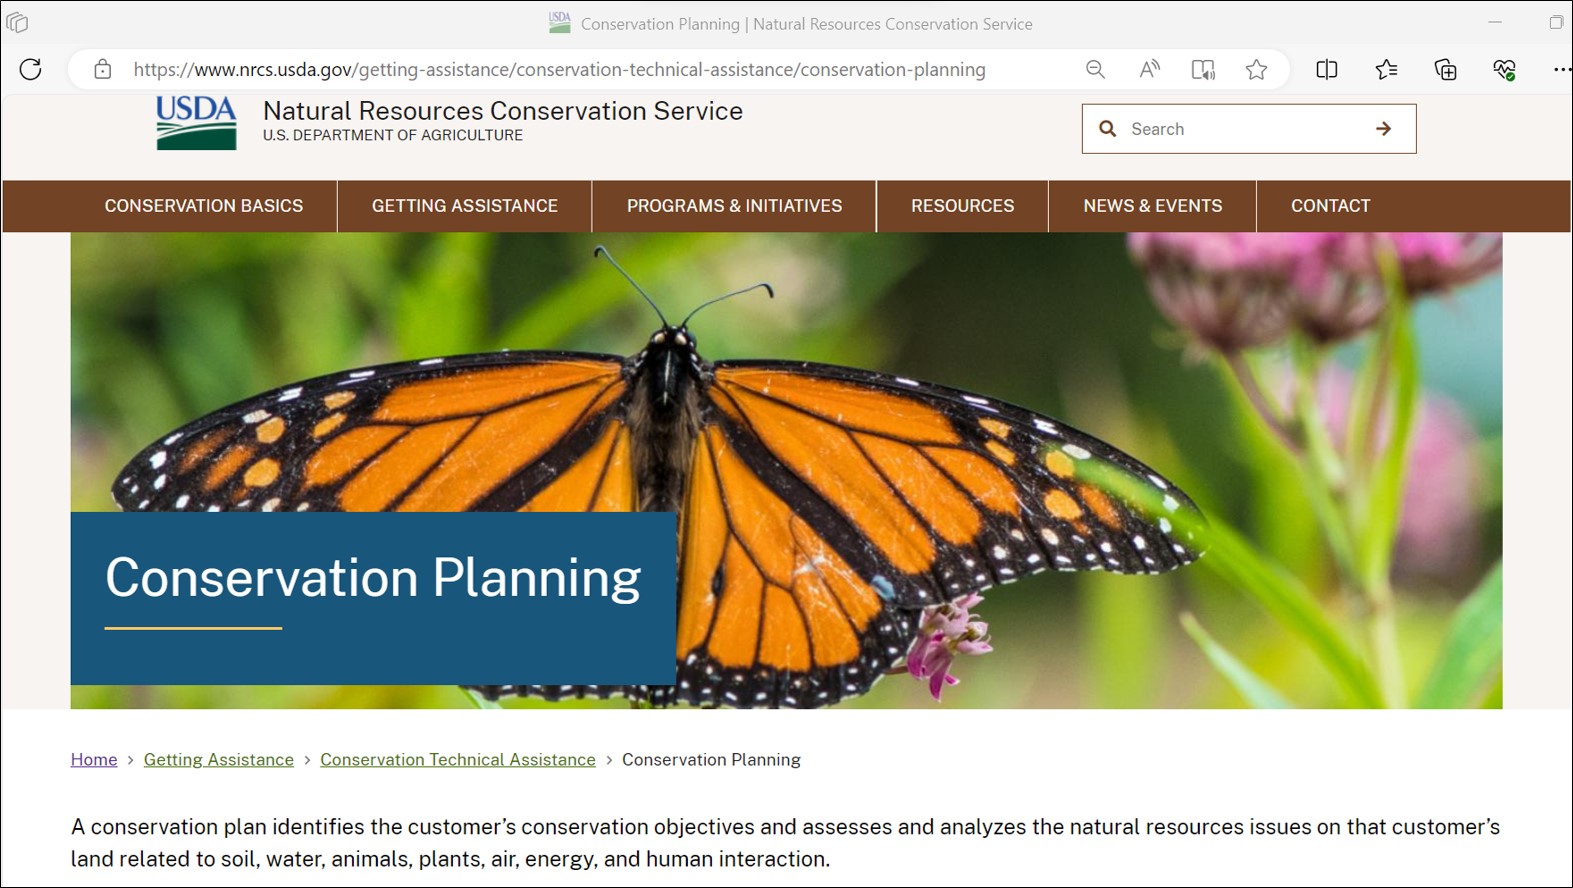 orange butterfly on the banner of the natural resources conservation service website.